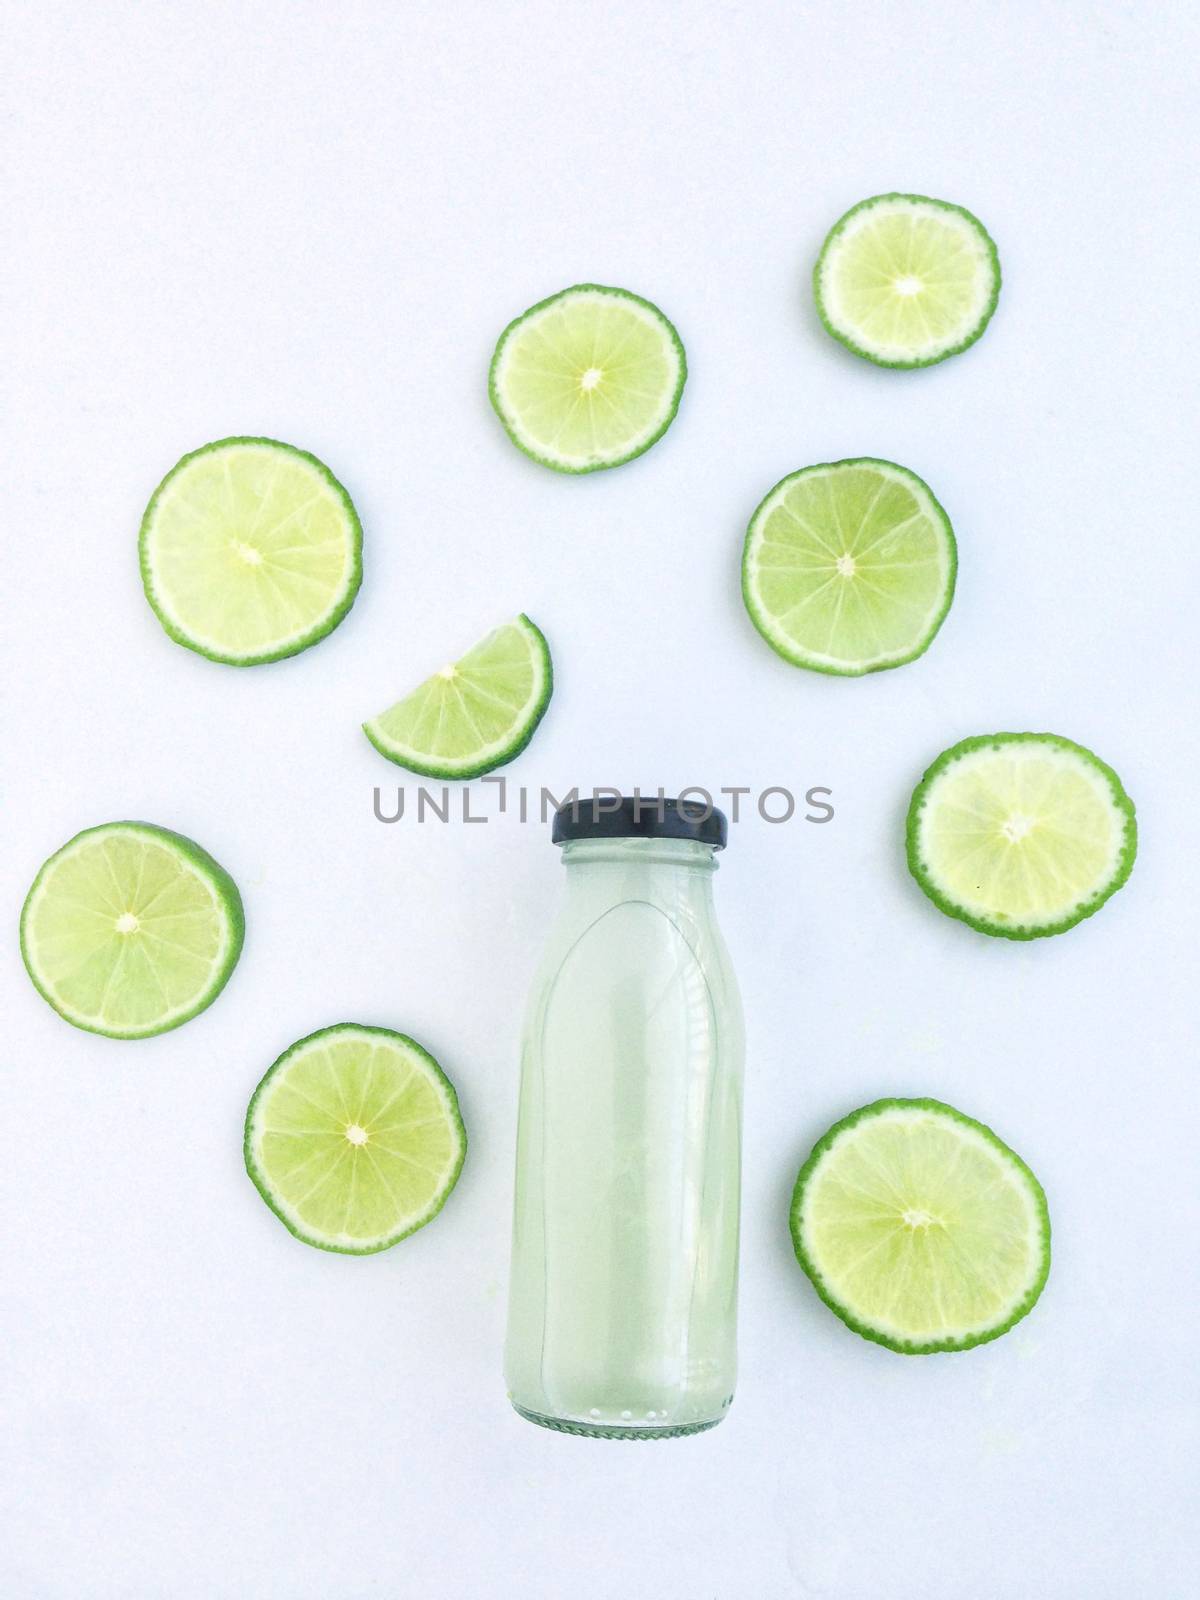 Bottle of lime drinks and Cut into wedges, white background by Bowonpat